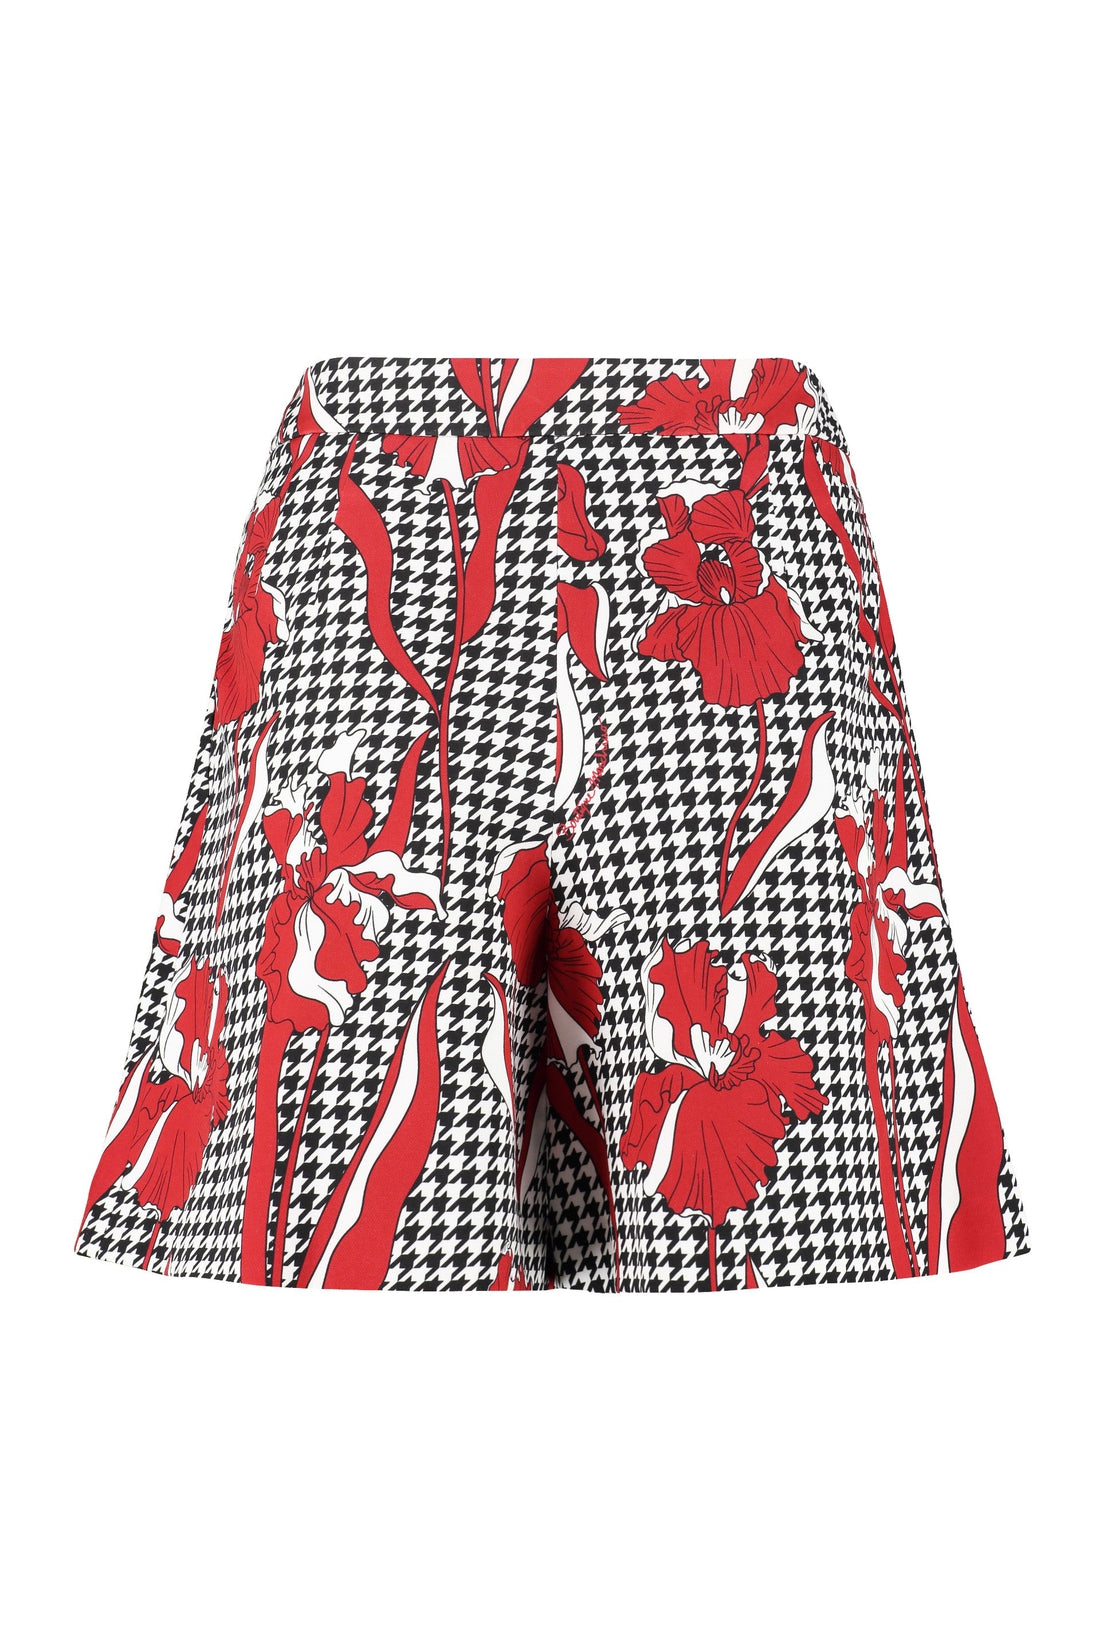 Boutique Moschino-OUTLET-SALE-Houndstooth shorts-ARCHIVIST